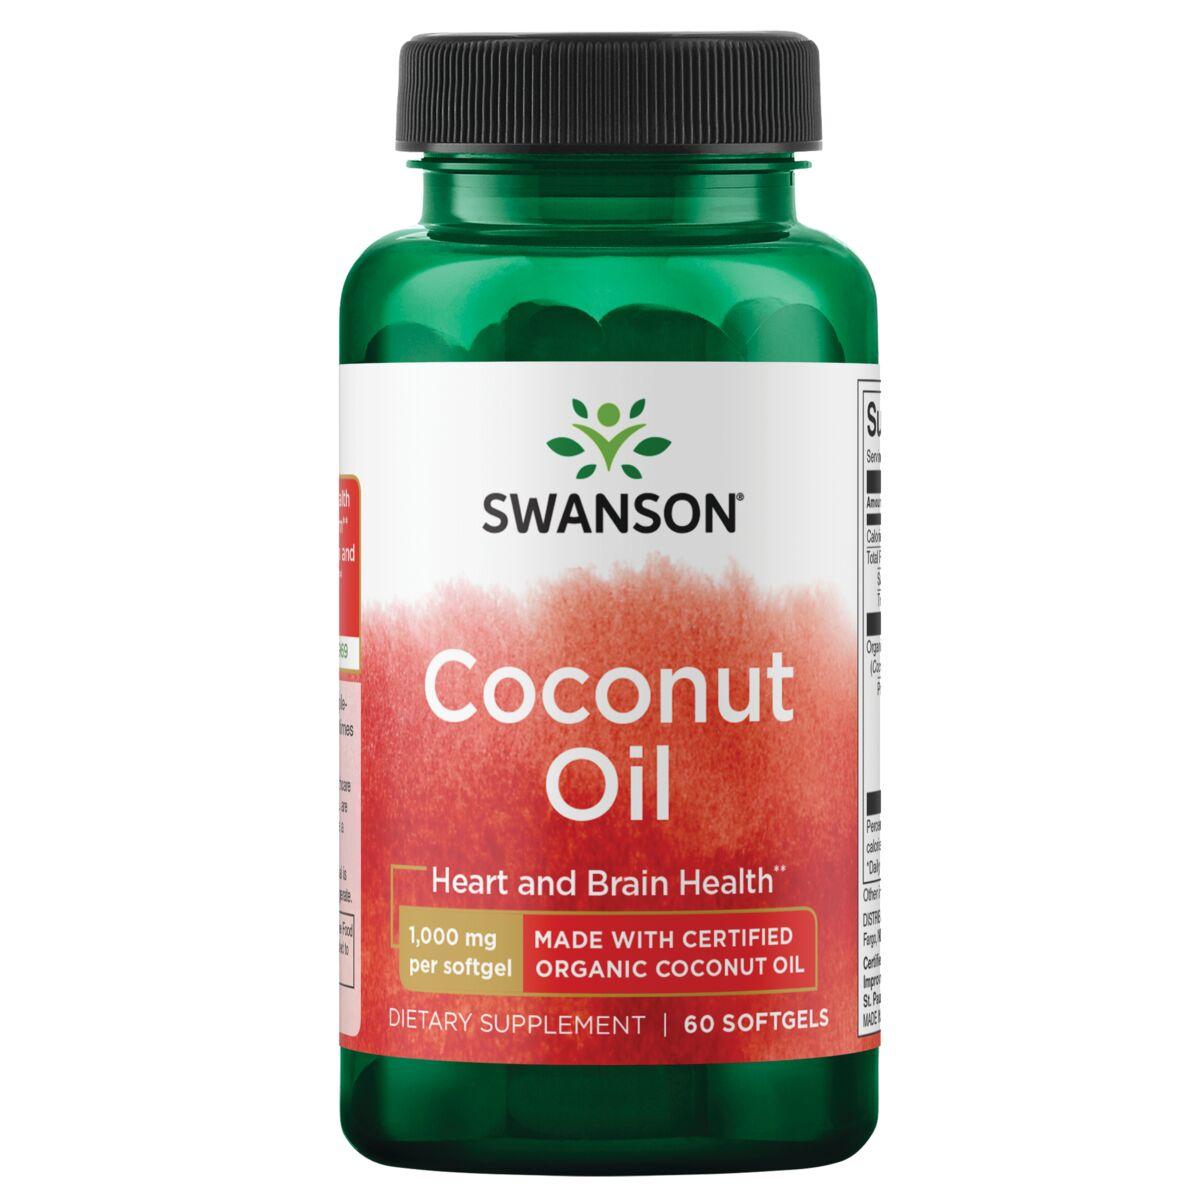 Swanson EFAs Coconut Oil Made with Certified Organic Supplement Vitamin | 1000 mg | 60 Soft Gels